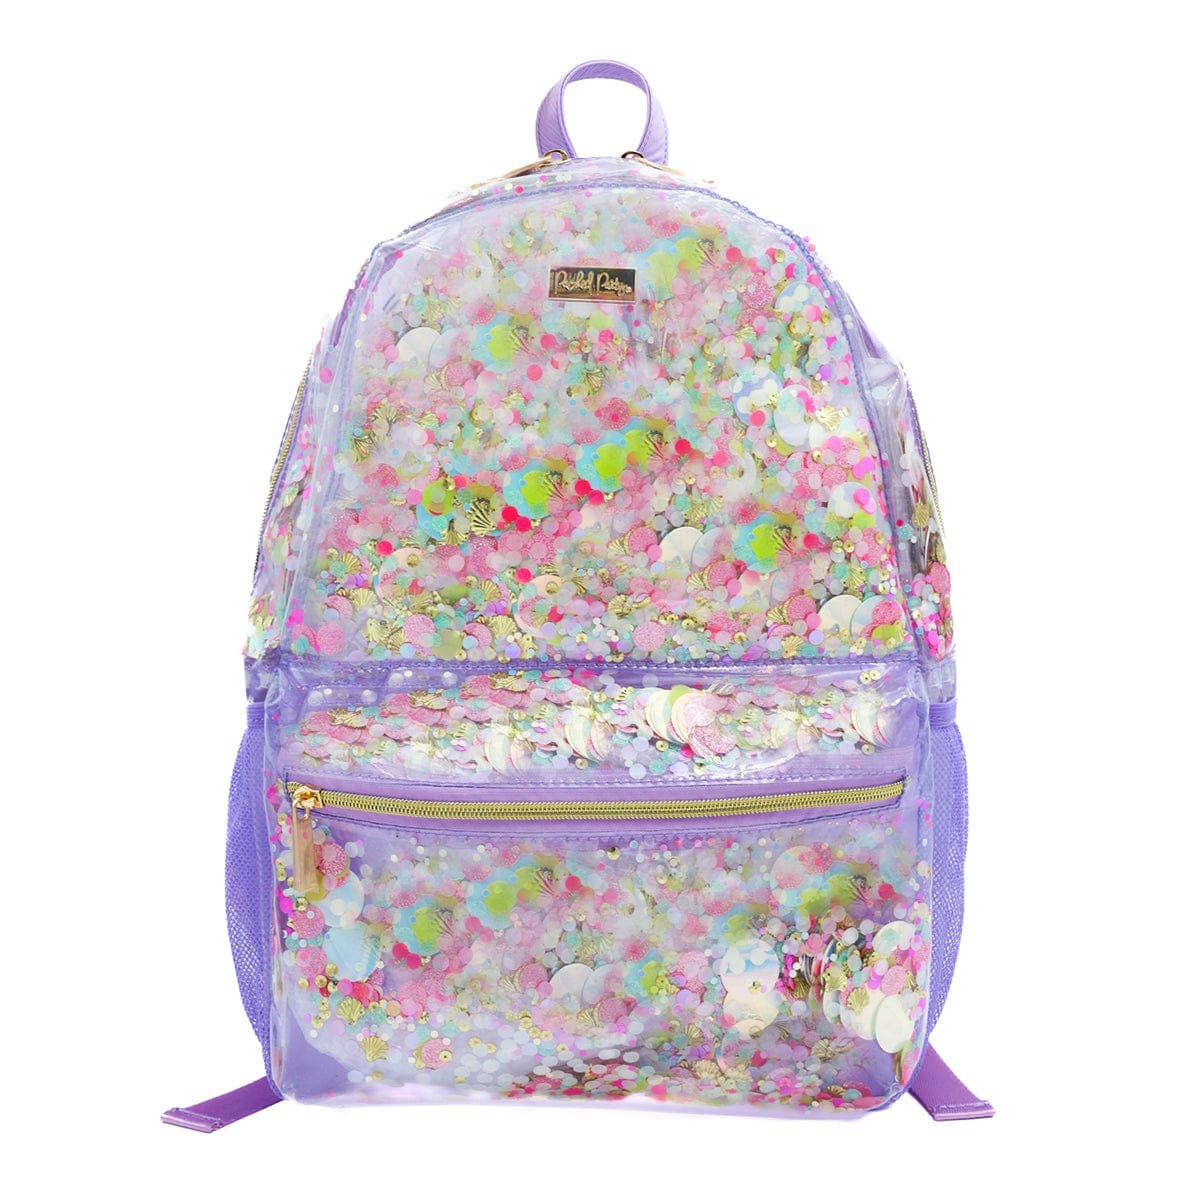 Girls Backpack and Lunchbox Sets – Cheeky Plum